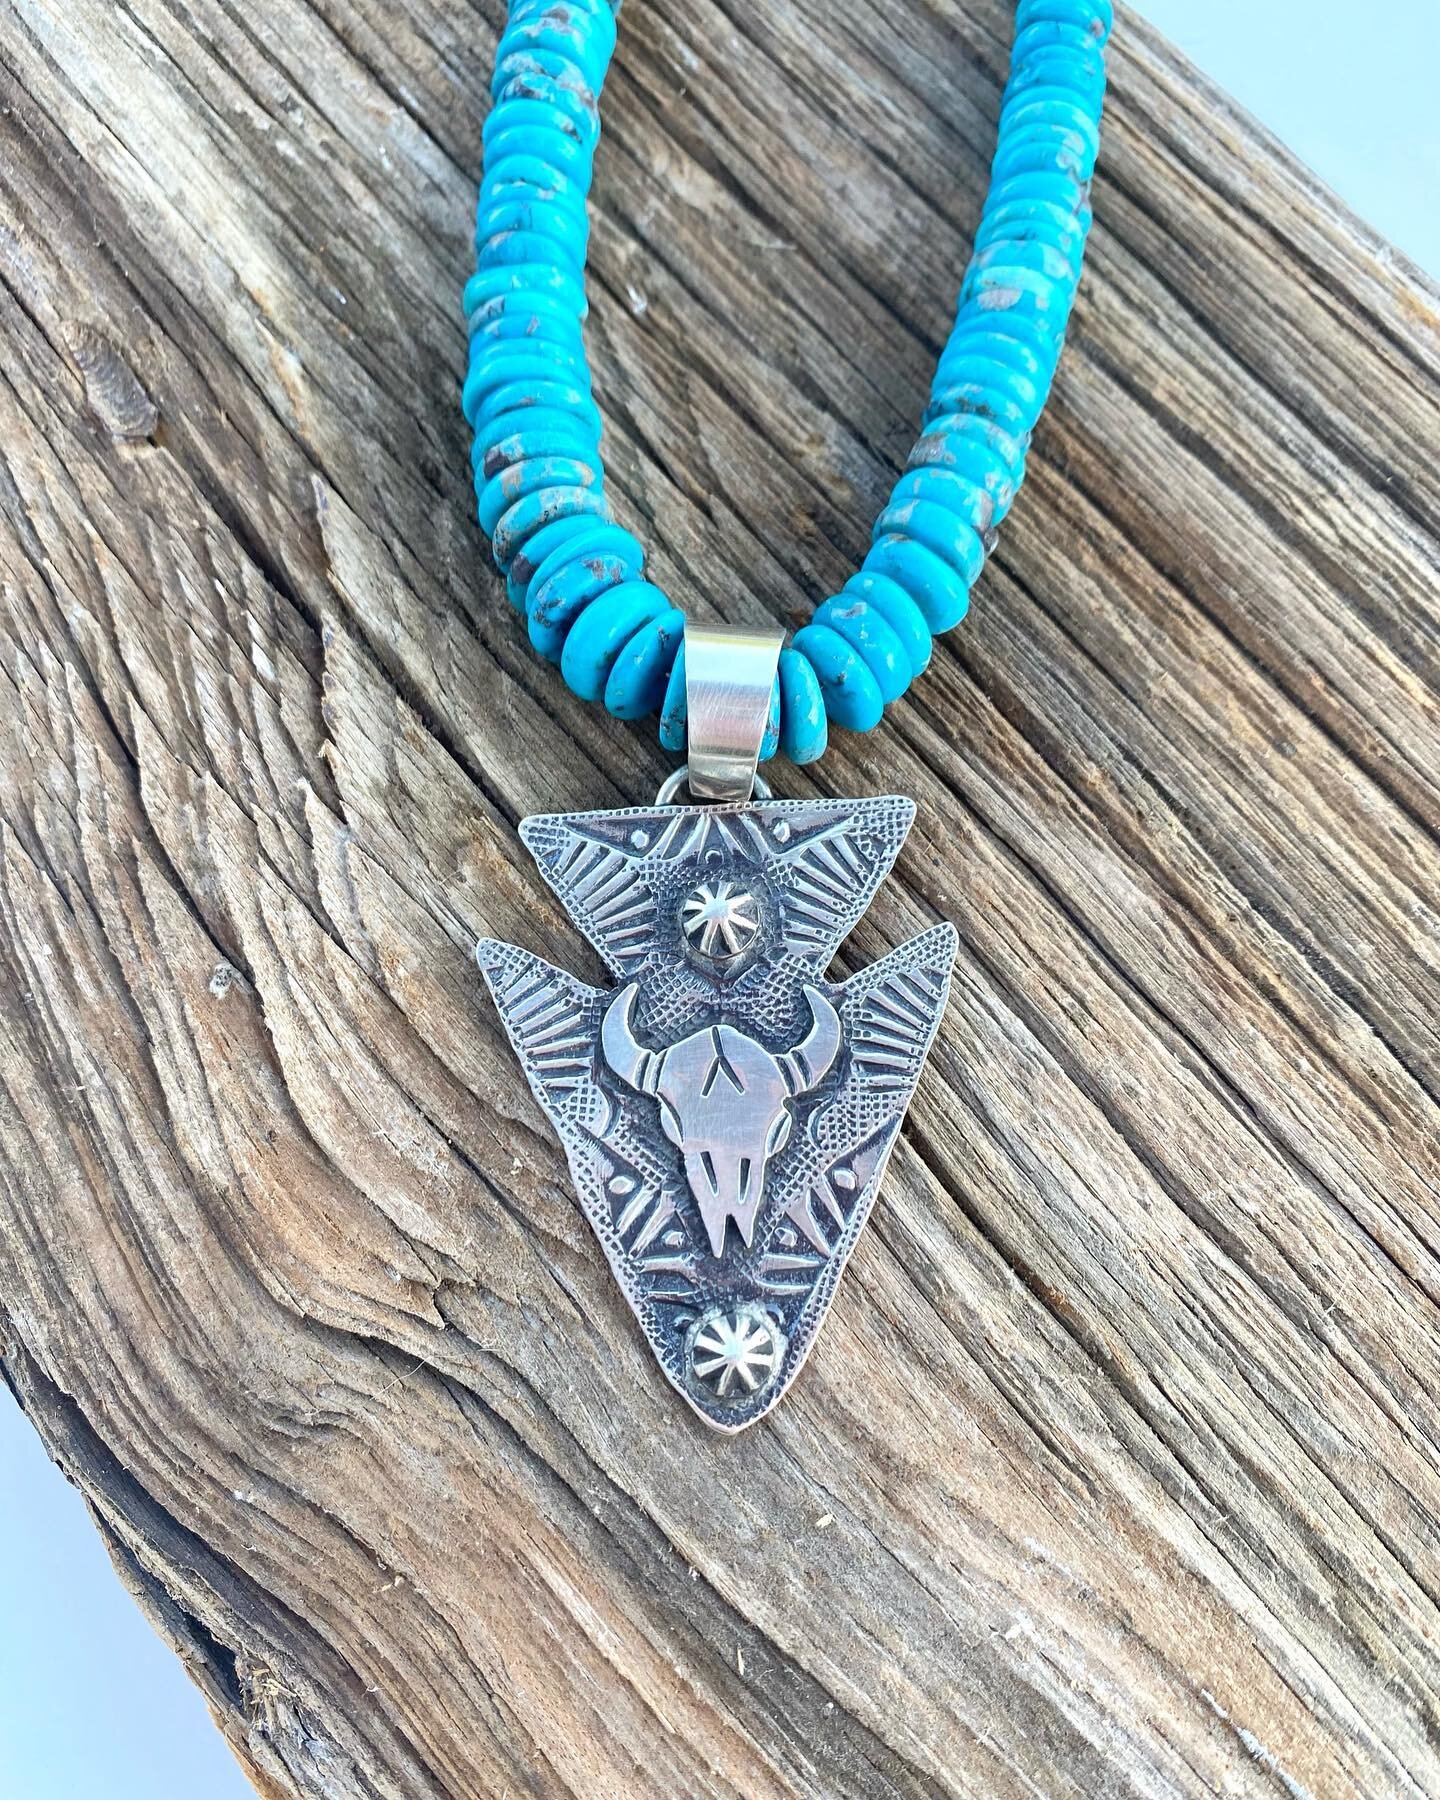 I had this awesome pendant custom made by the talented Navajo artist, Virgil Reeder. I explained to him my love of Texas, longhorns and artifacts of the past, like arrowheads. He ran with it and handcrafted this amazing piece! 

Direct message me if 